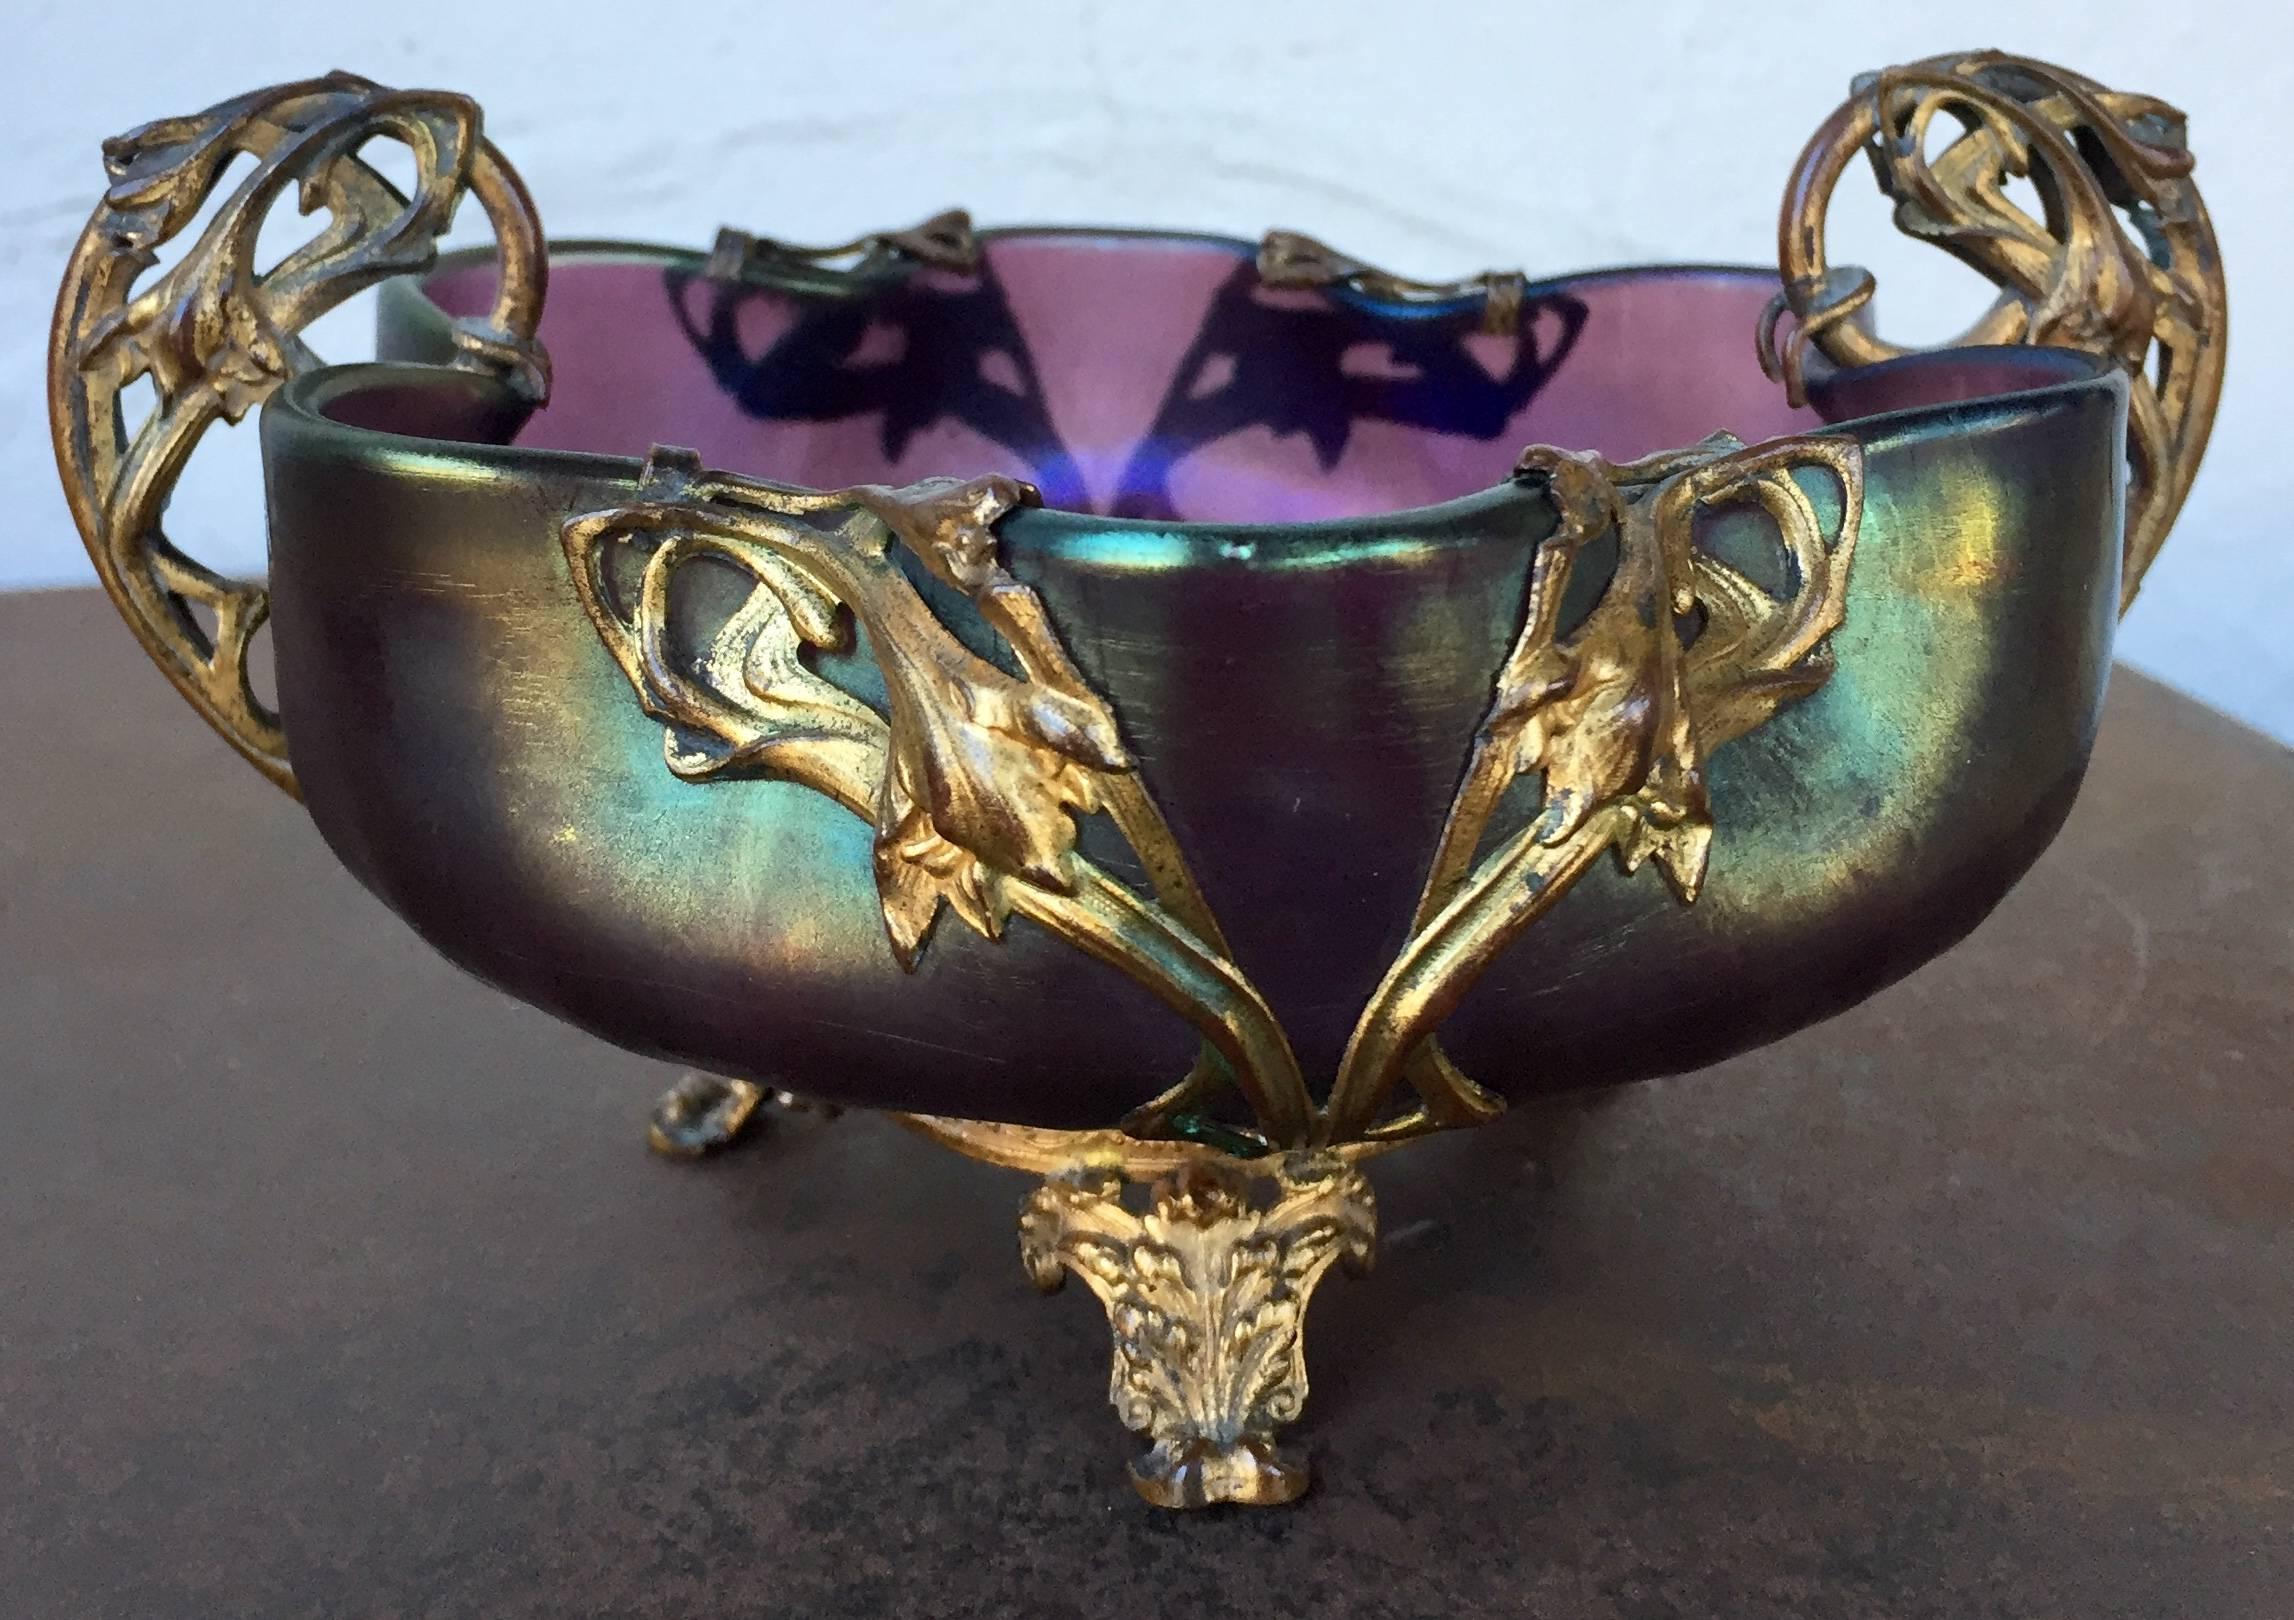 Czechoslovakian-Rindskopf Lucien glass bowl, in gilt doré mount with tripod ornate base, two scrolled and detailed handles, in style of Marcel Bing (1875-1920). Measures: 6.25